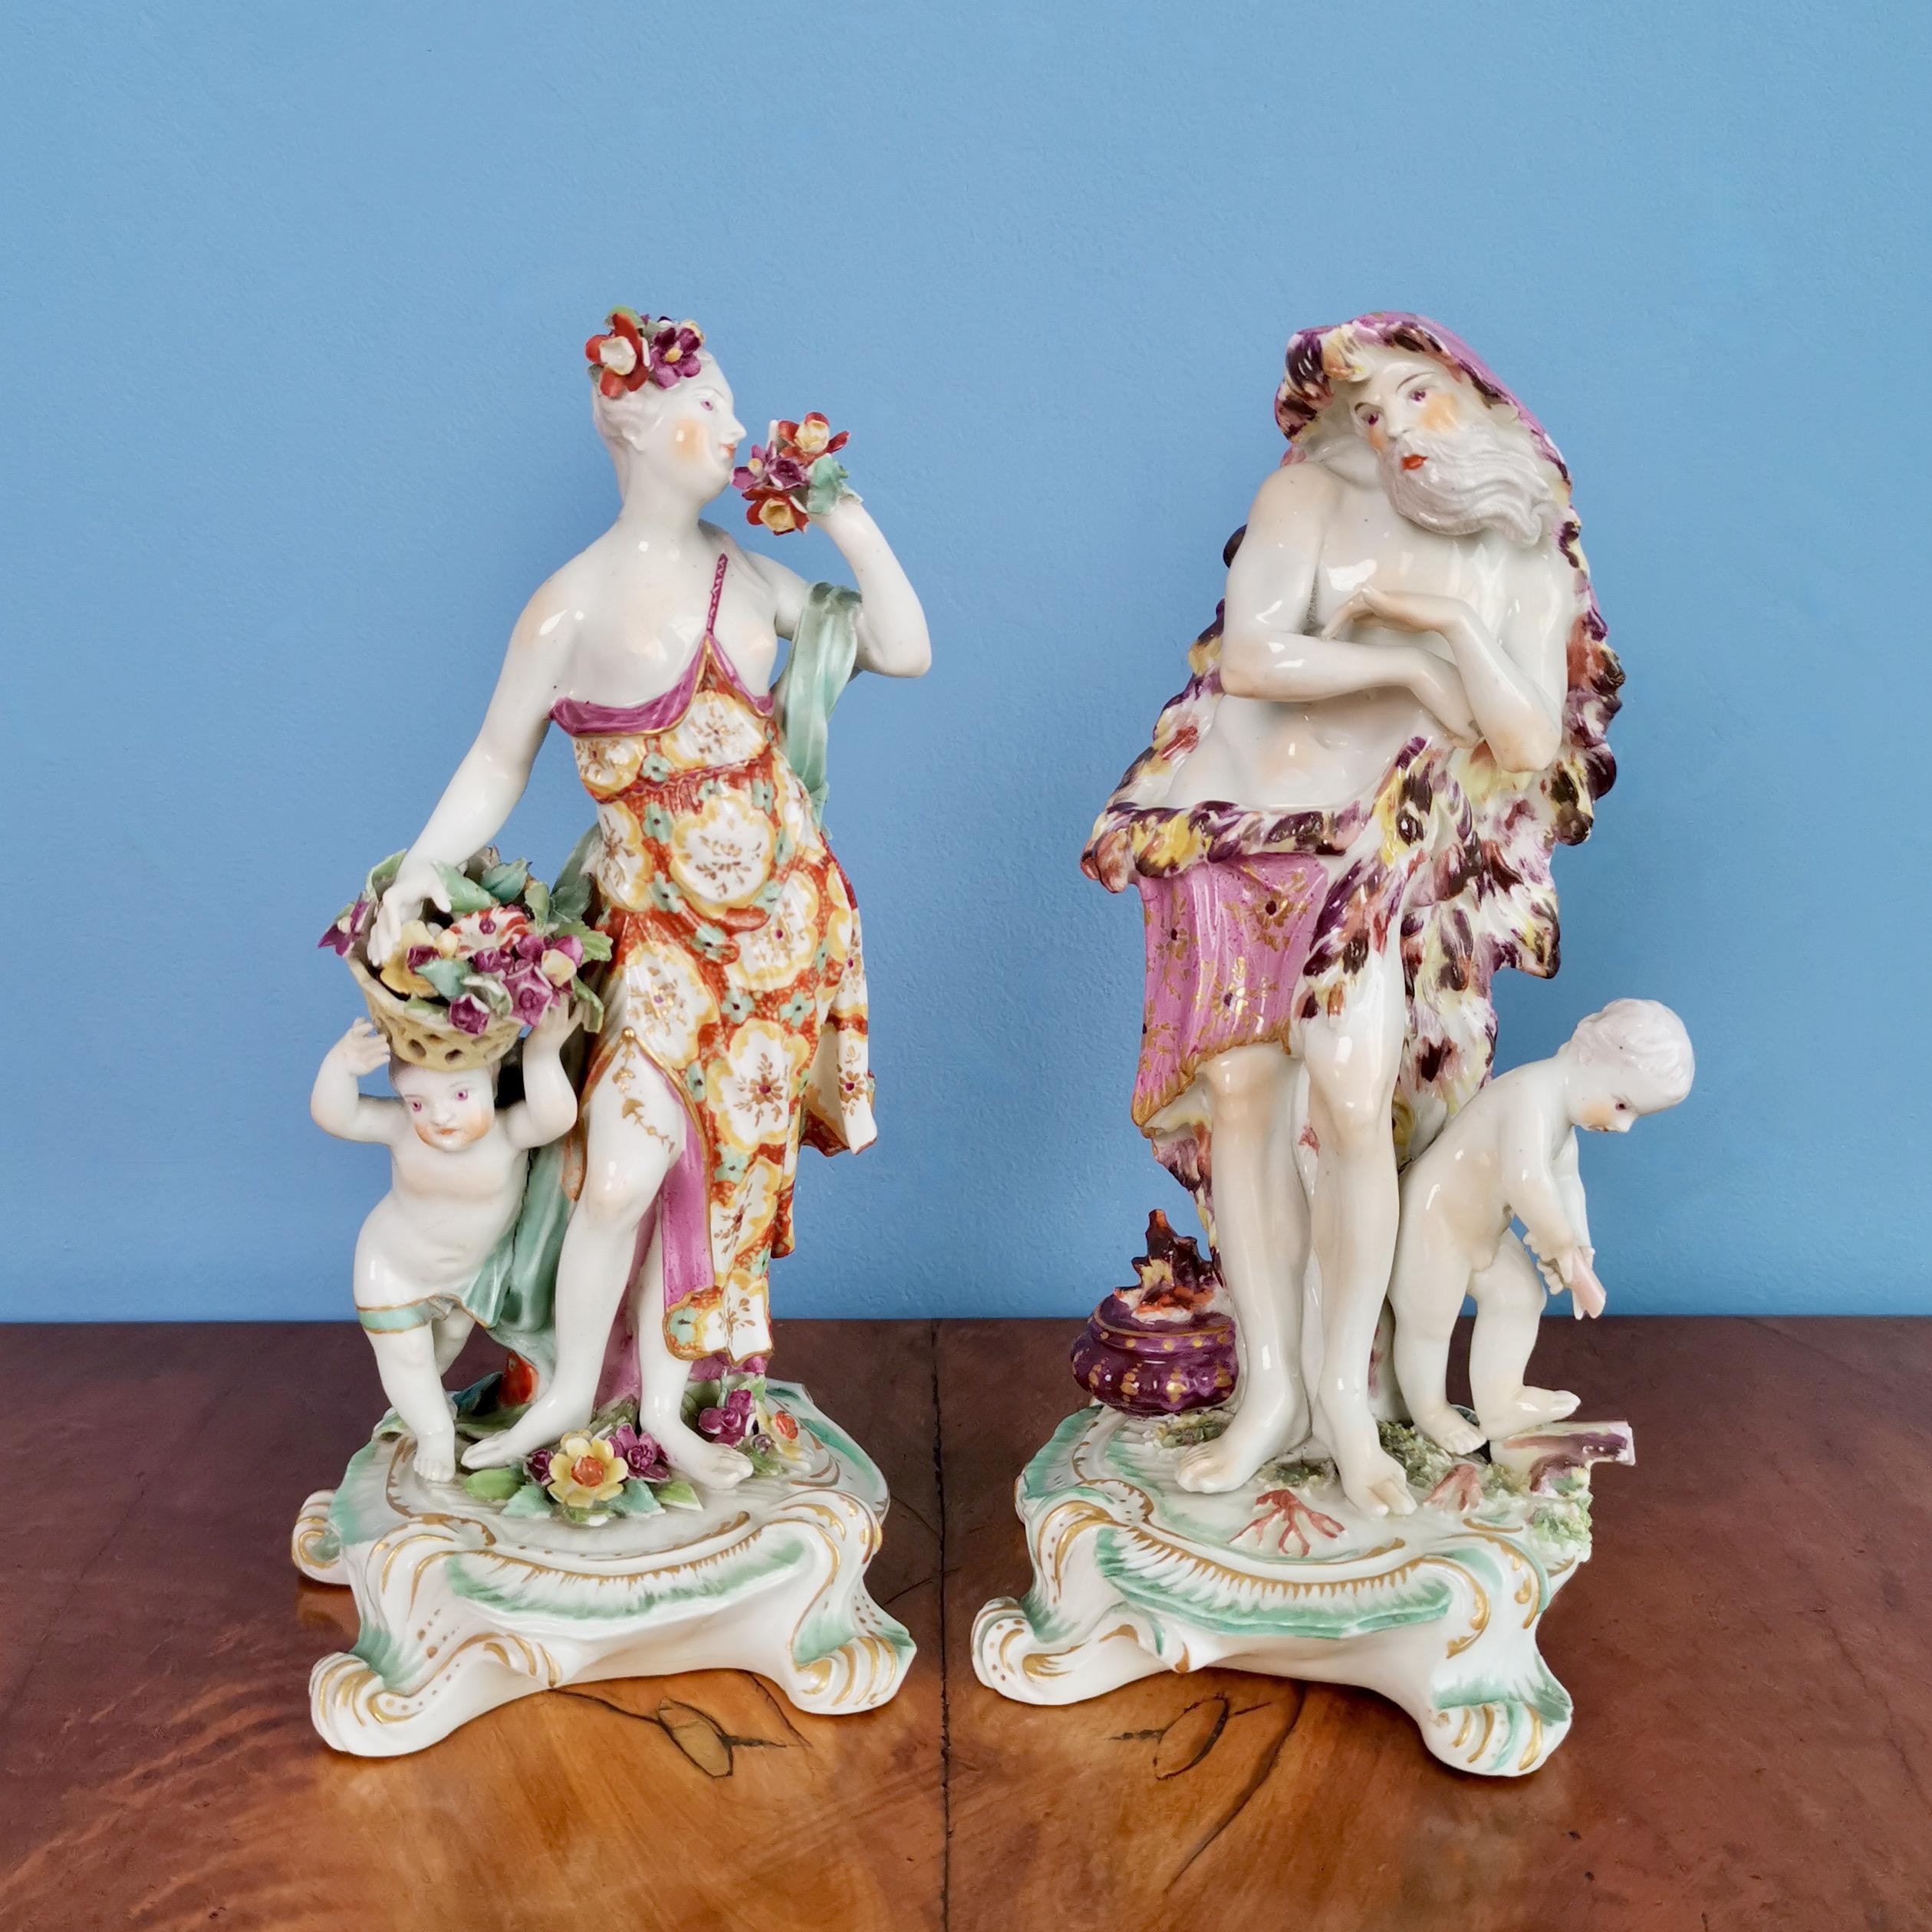 This is a fabulous pair of Derby porcelain figures of Winter and Spring, made between 1756 and 1759, which was the Rococo era. This is what is called the 